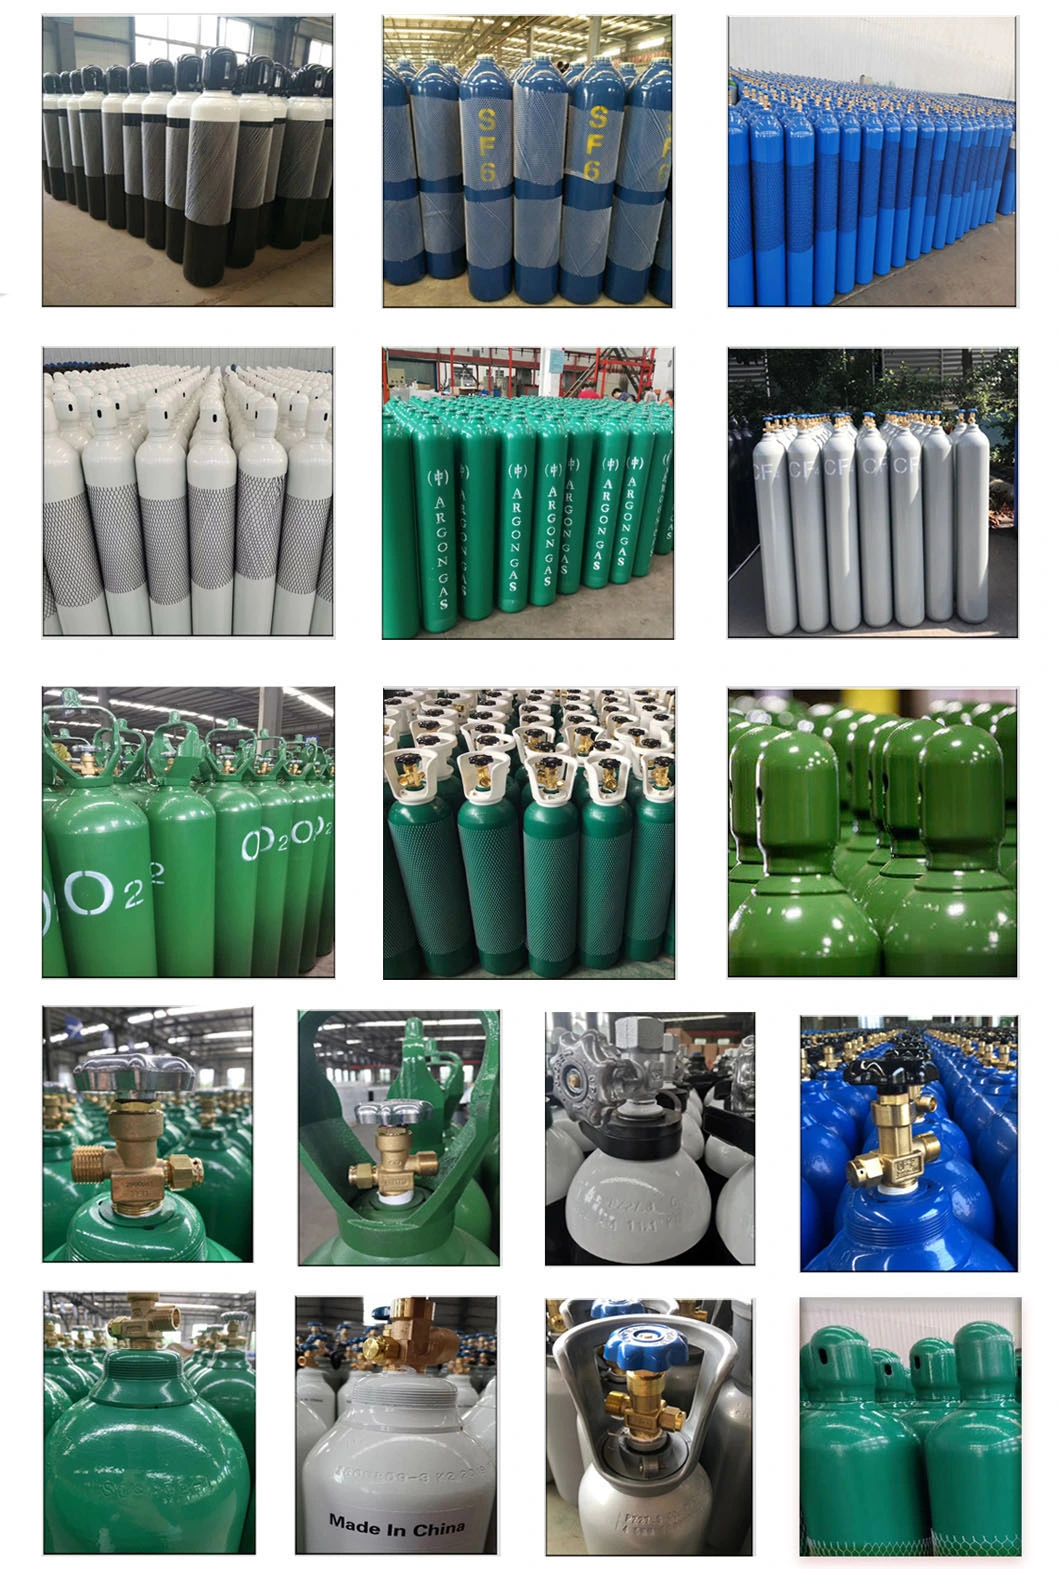 6.0L 20MPa Factory High Pressure Seamless Aluminum Gas Cylinder Medical Nitrous Oxide Oxygen Cylinder